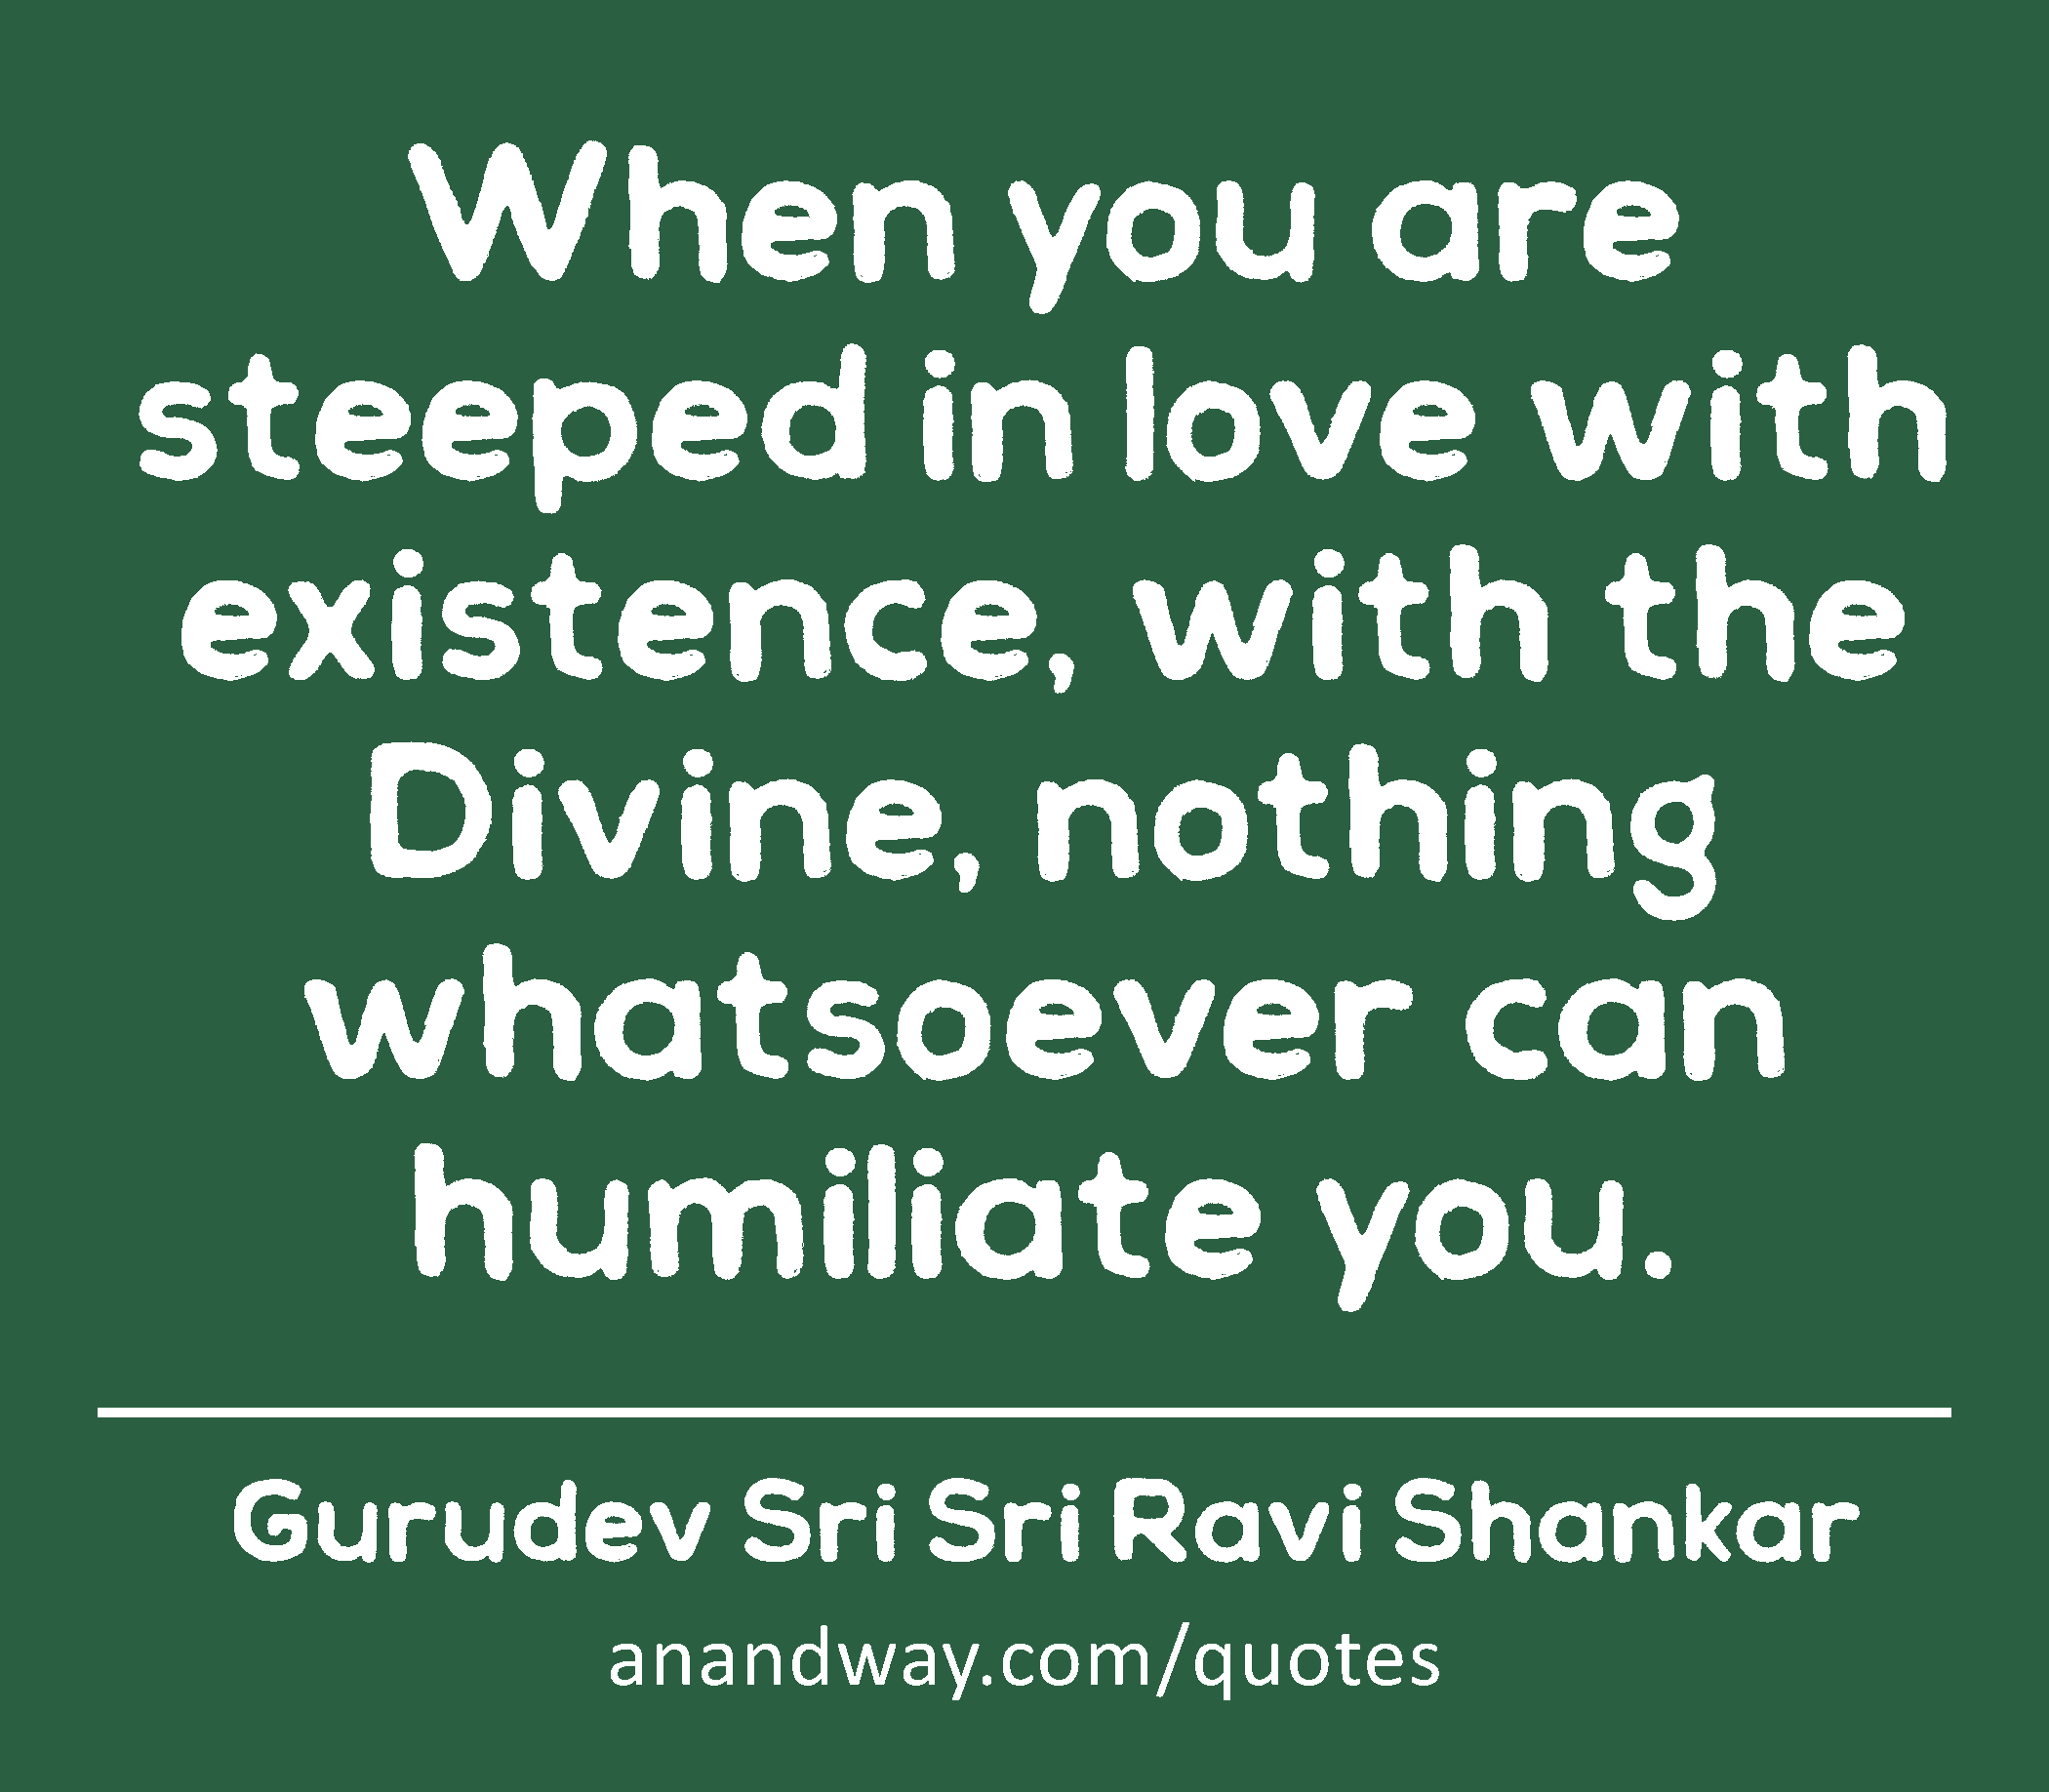 When you are steeped in love with existence, with the Divine, nothing whatsoever can humiliate you.
 -Gurudev Sri Sri Ravi Shankar